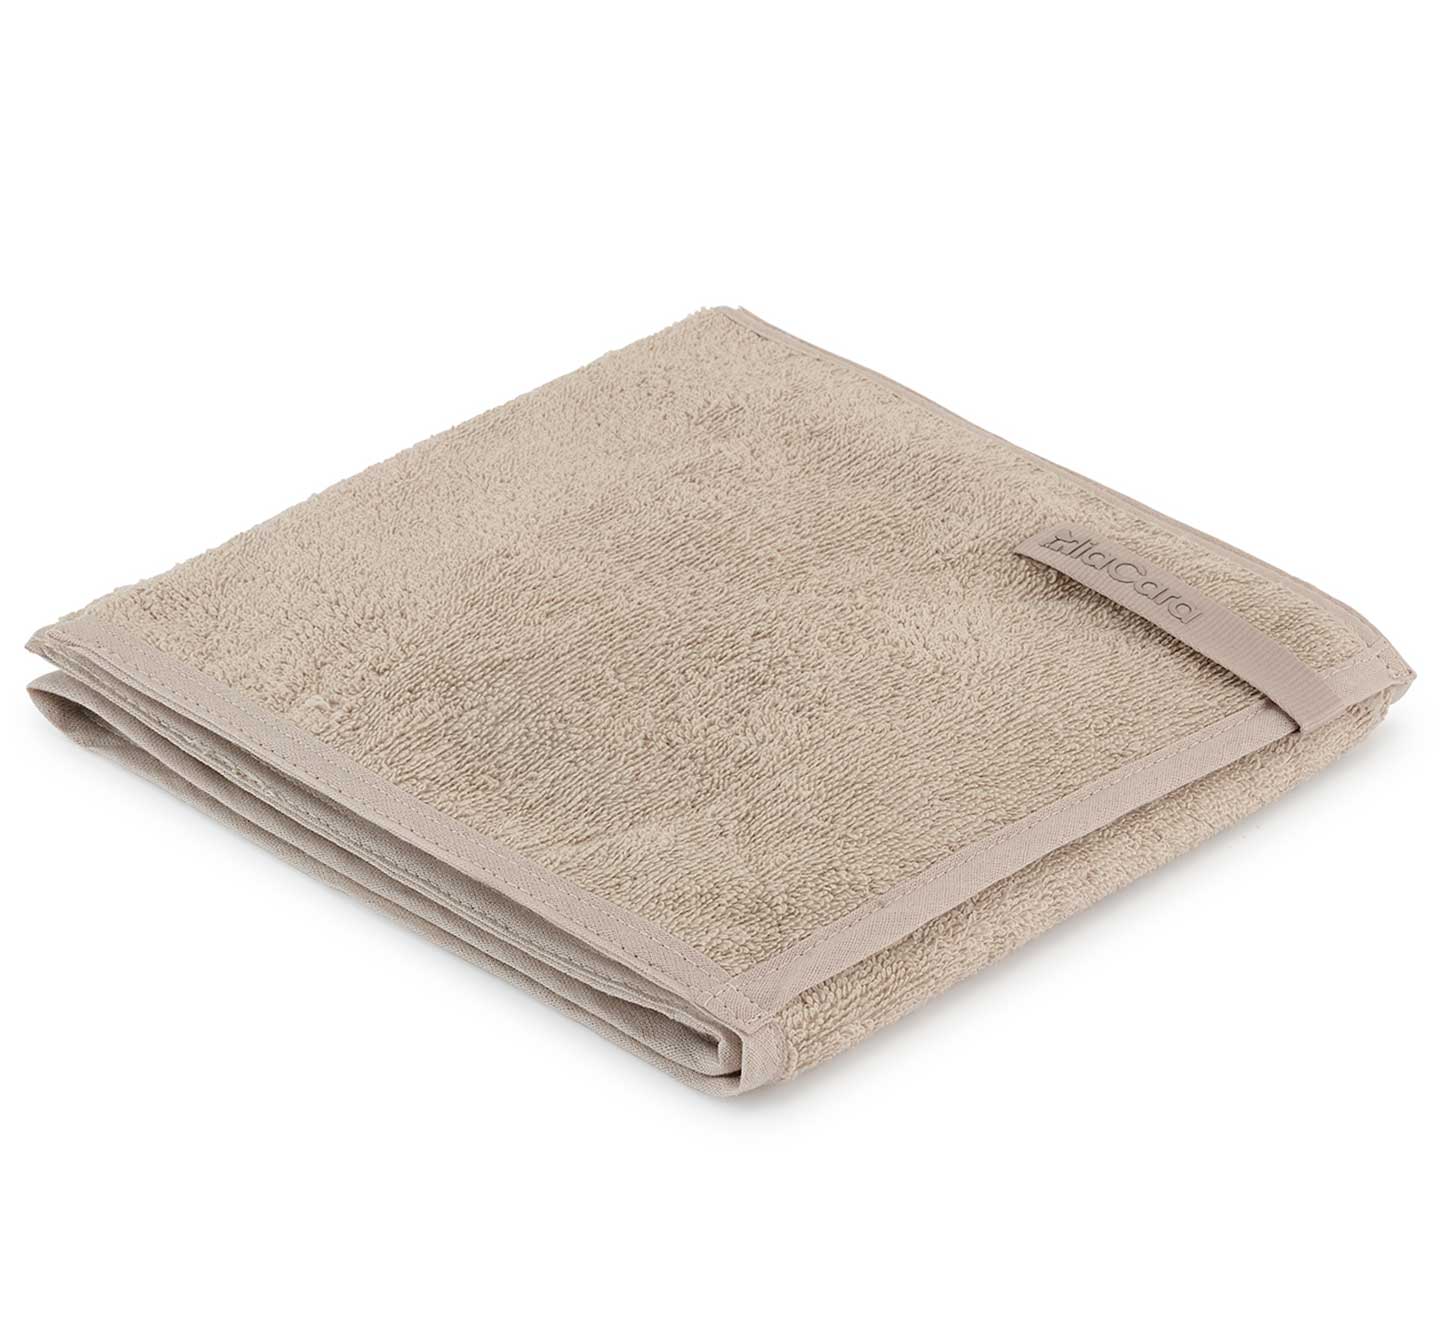 Organic cotton terry dog towel for superior absorbency